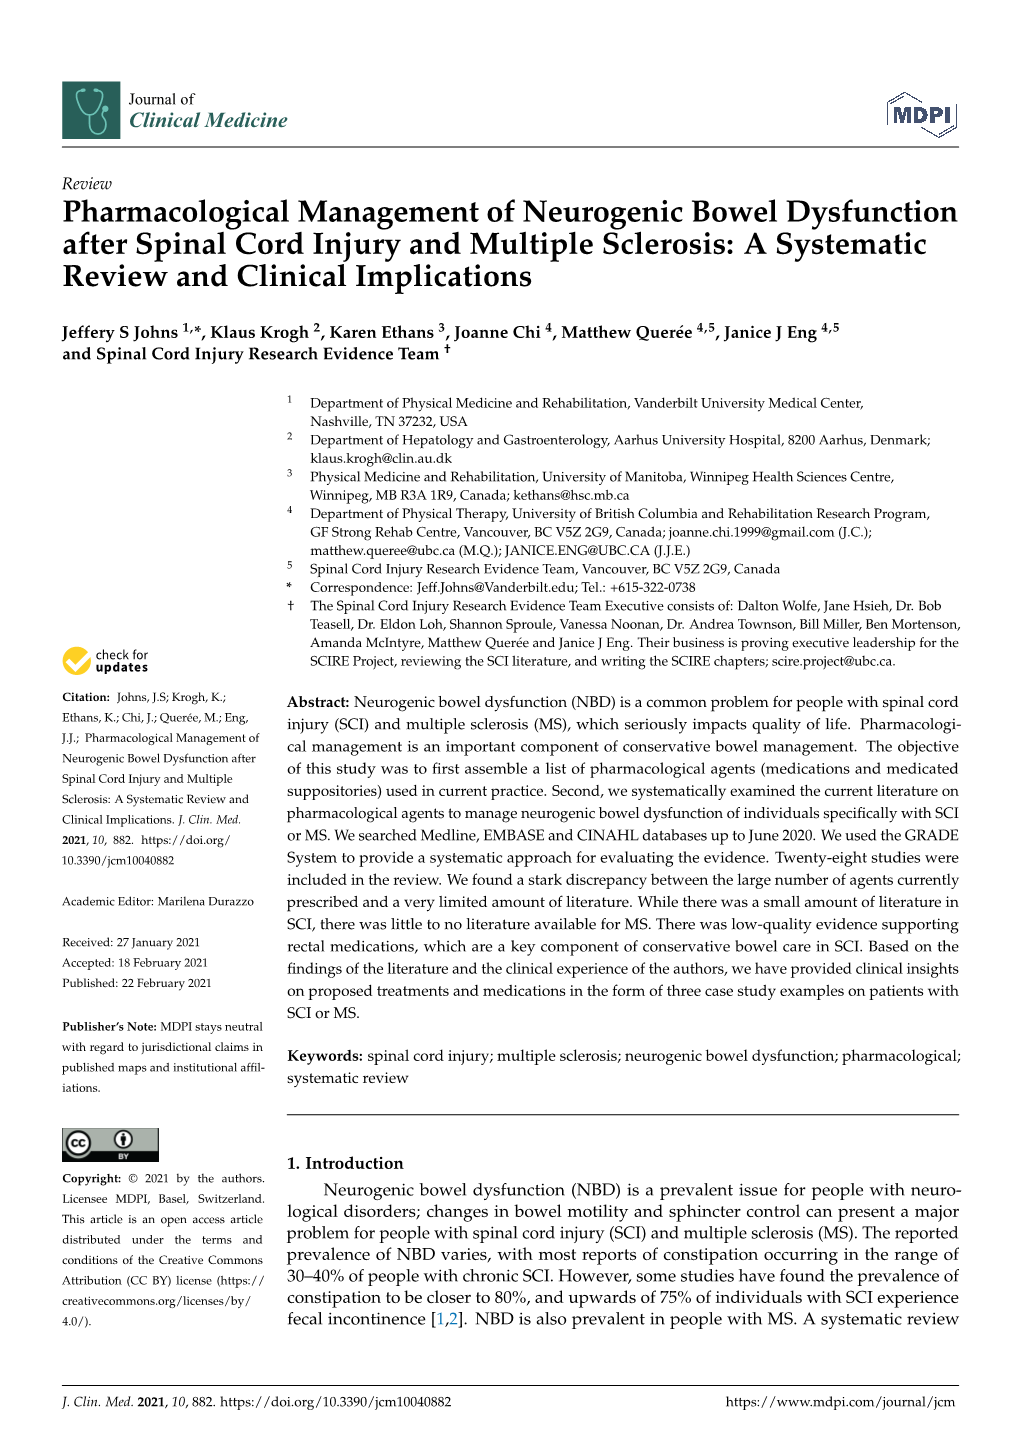 Pharmacological Management of Neurogenic Bowel Dysfunction After Spinal Cord Injury and Multiple Sclerosis: a Systematic Review and Clinical Implications